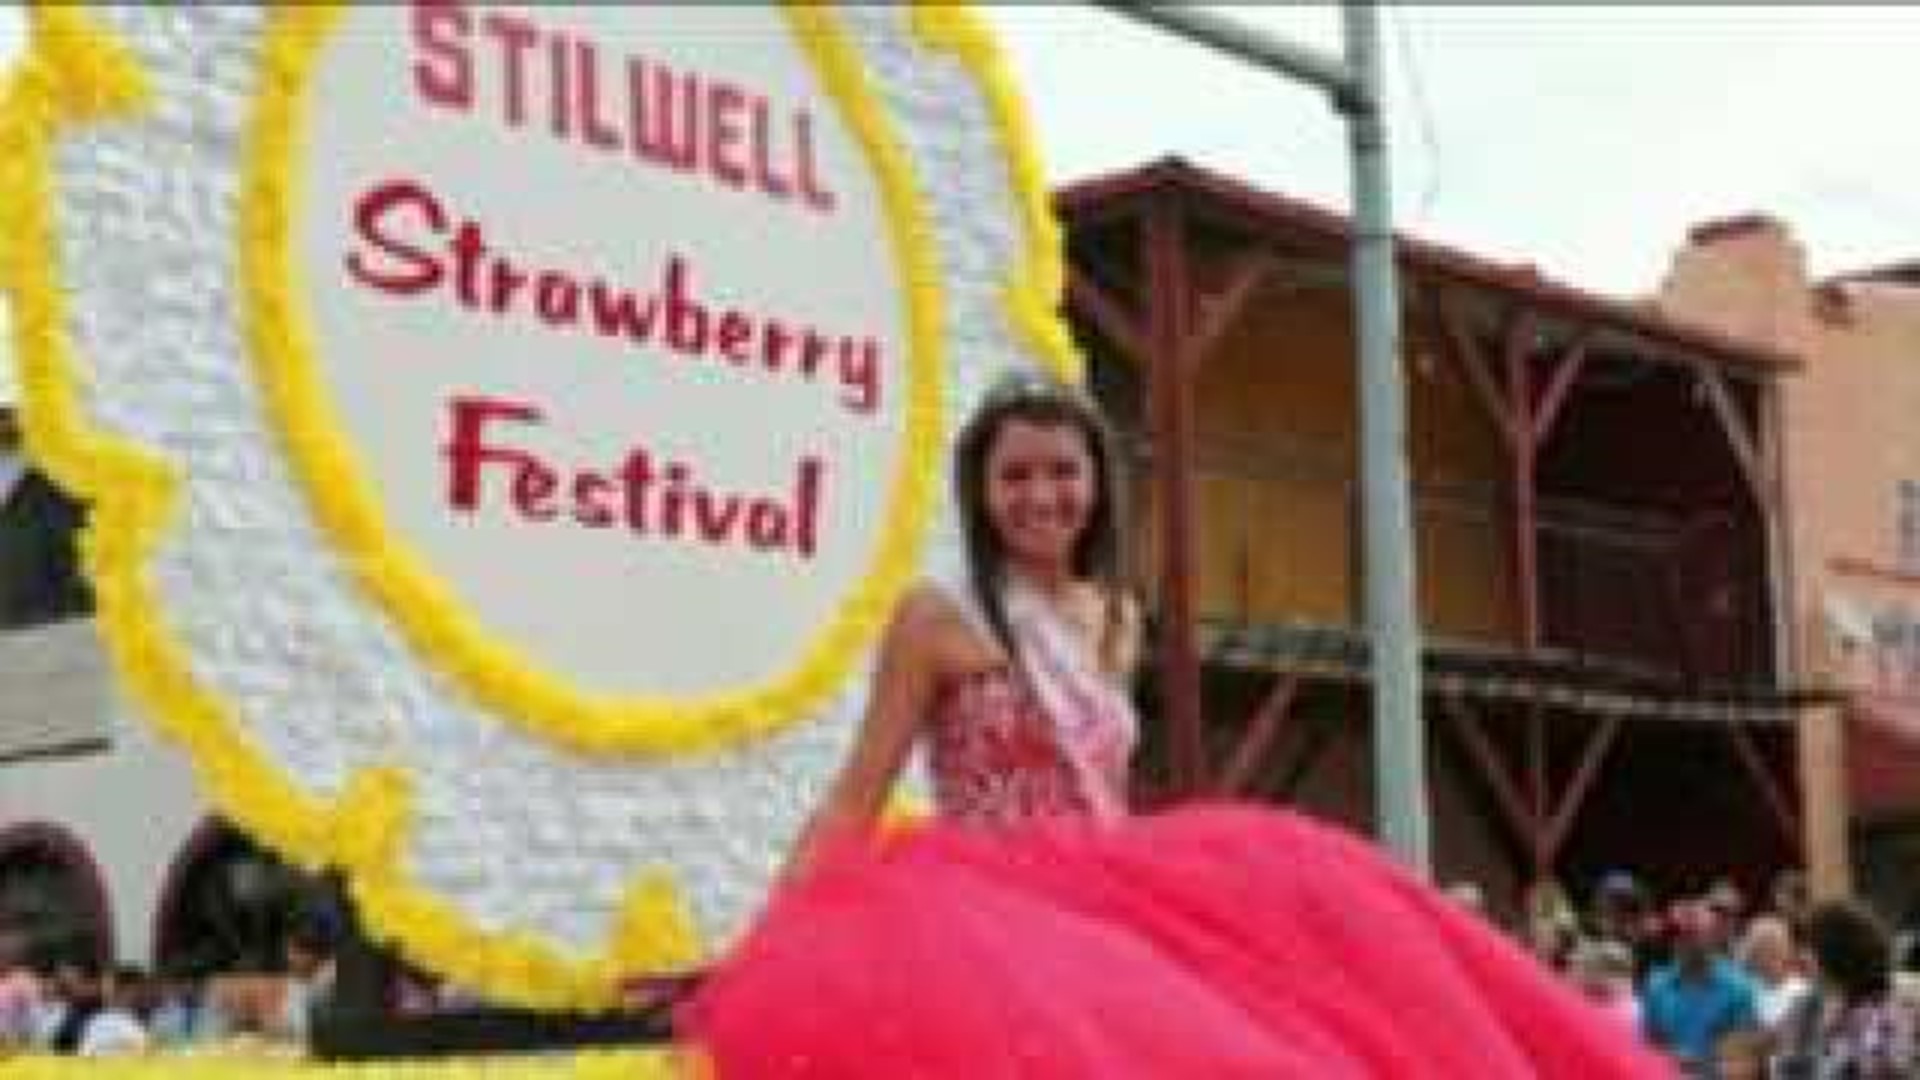 Local Growers Prepare for Strawberry Fest